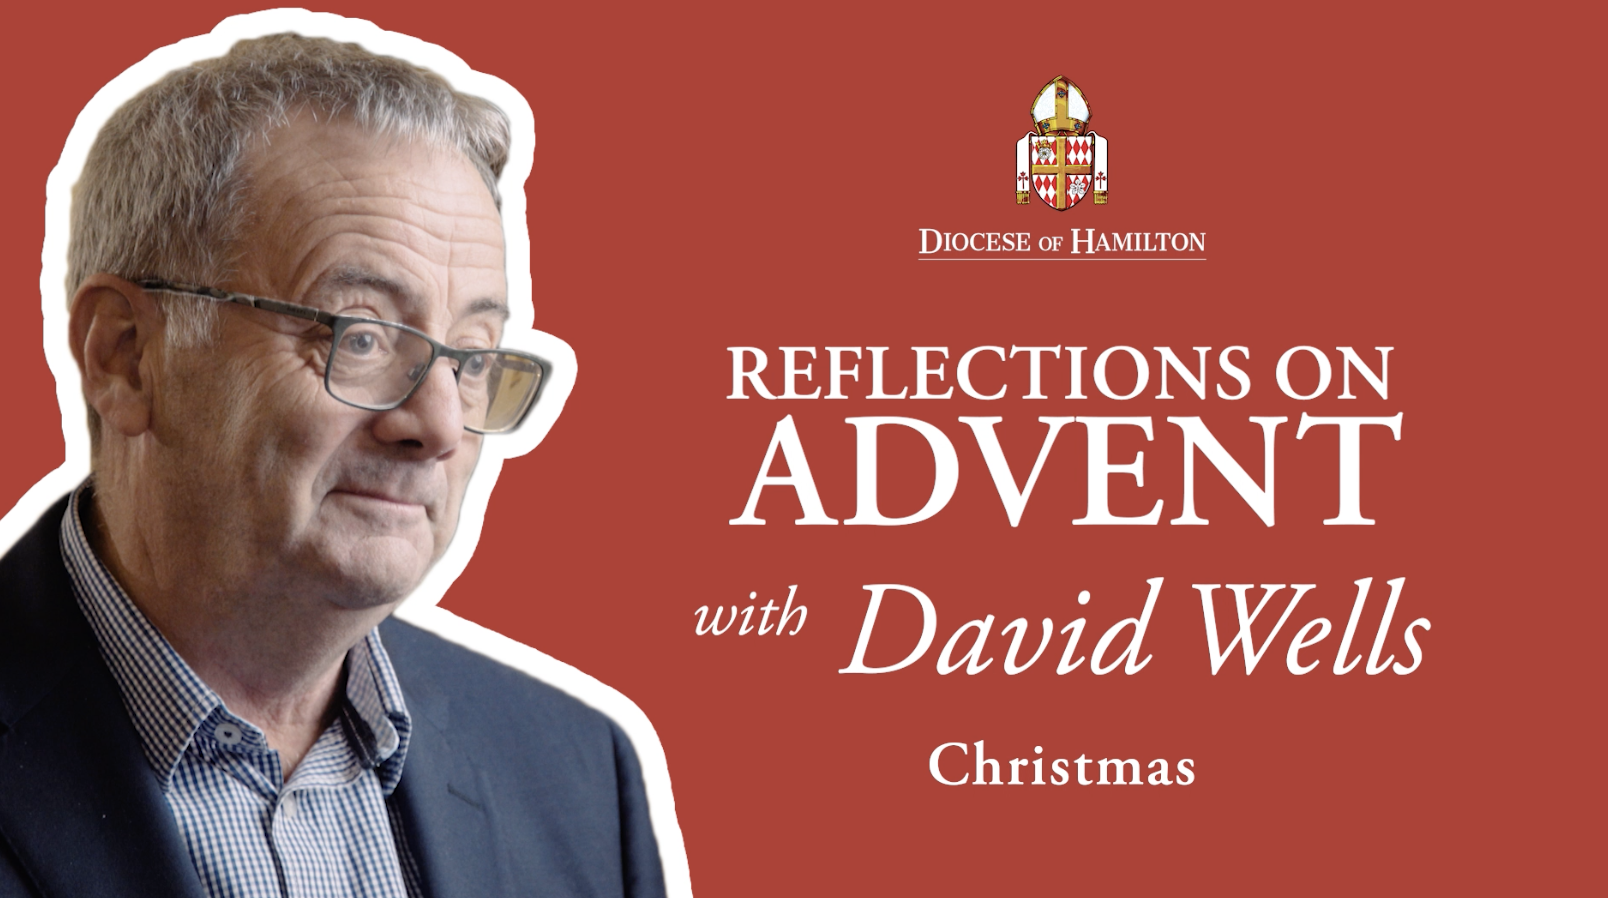 Advent Reflections with David Wells